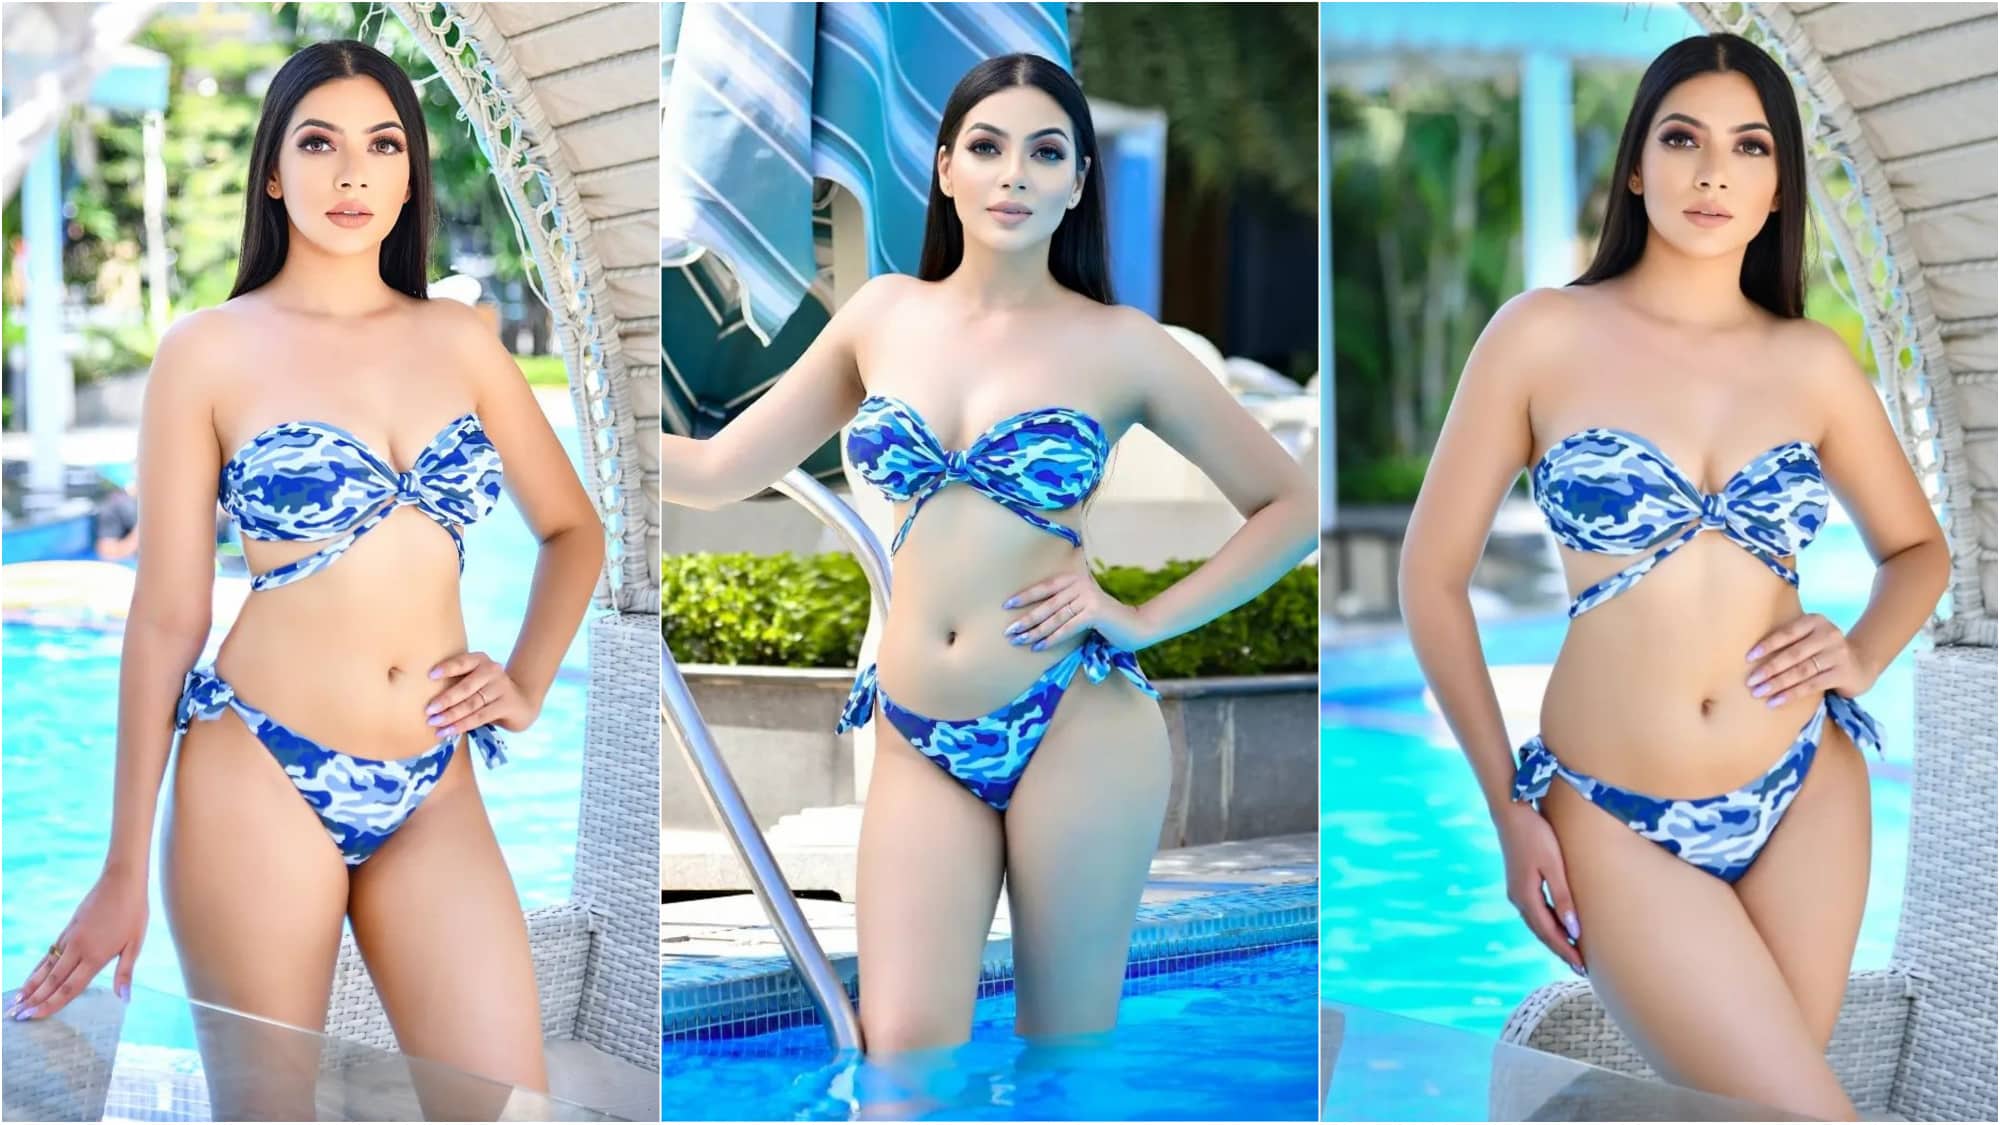 , Digital Creator and Social Media Influencer Niharika Gandhi’s These Pictures Are Too Hot To Handle